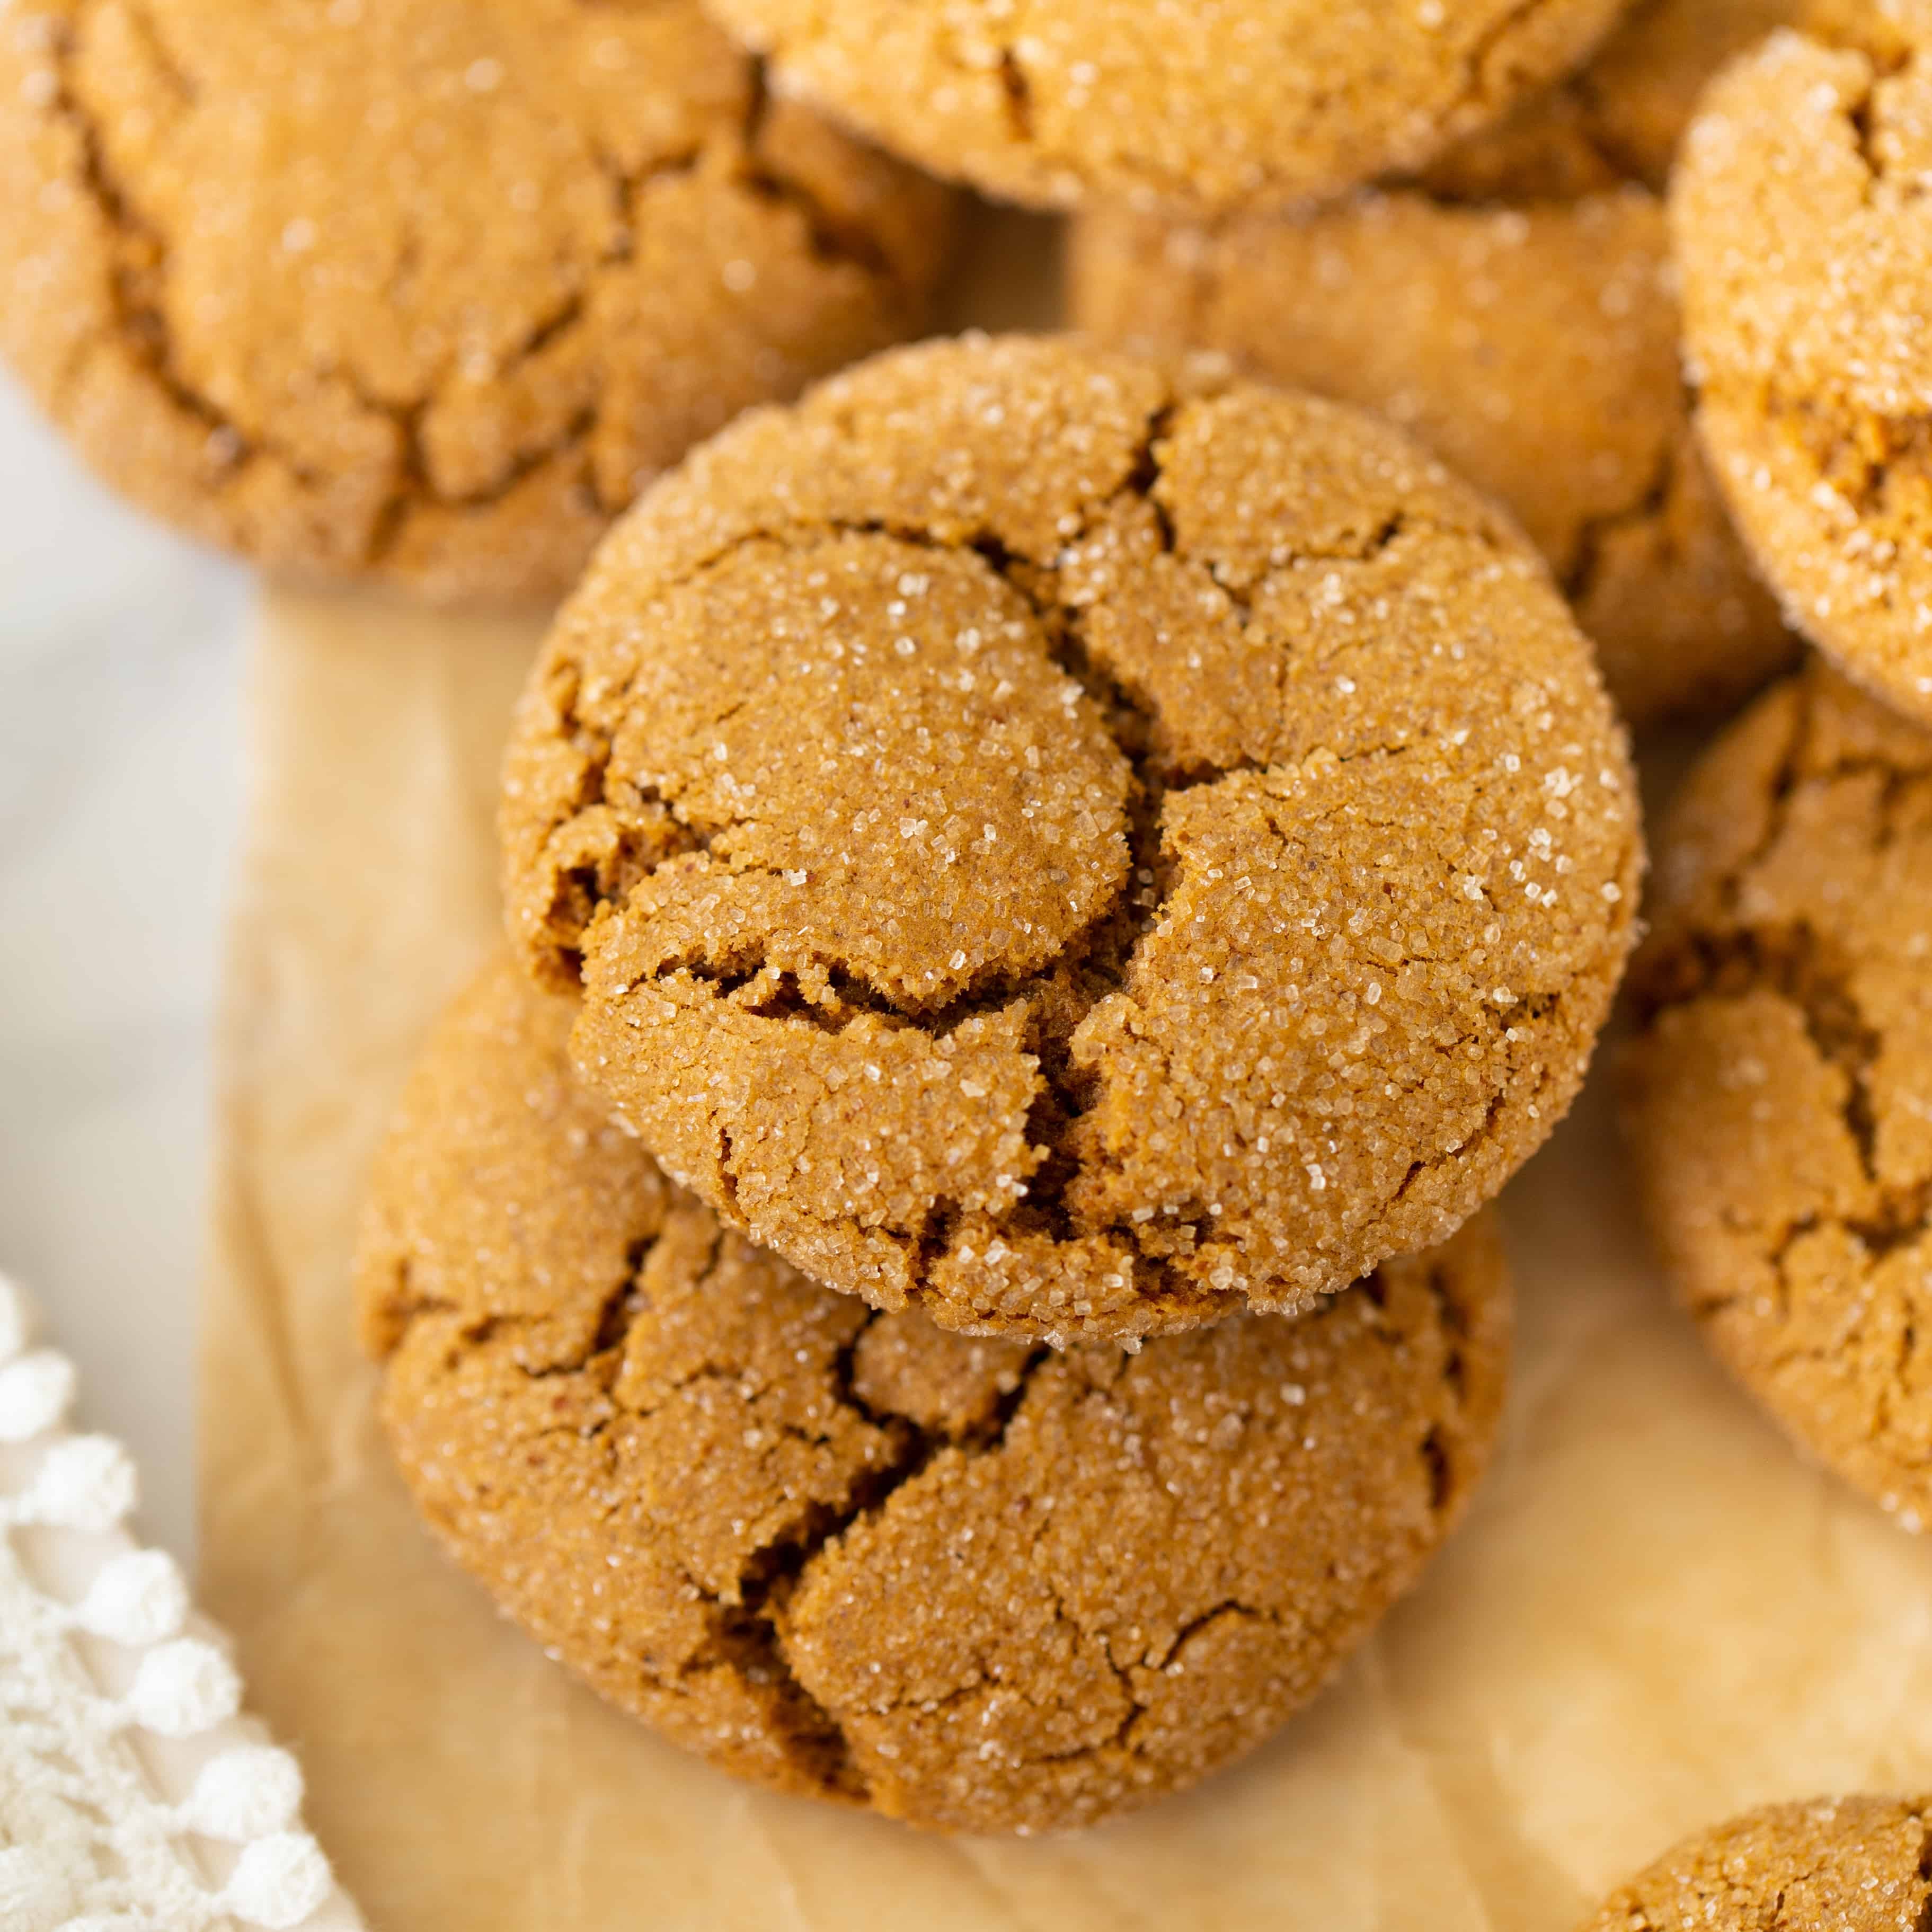 gluten-free molasses cookies up close on brown parchment paper